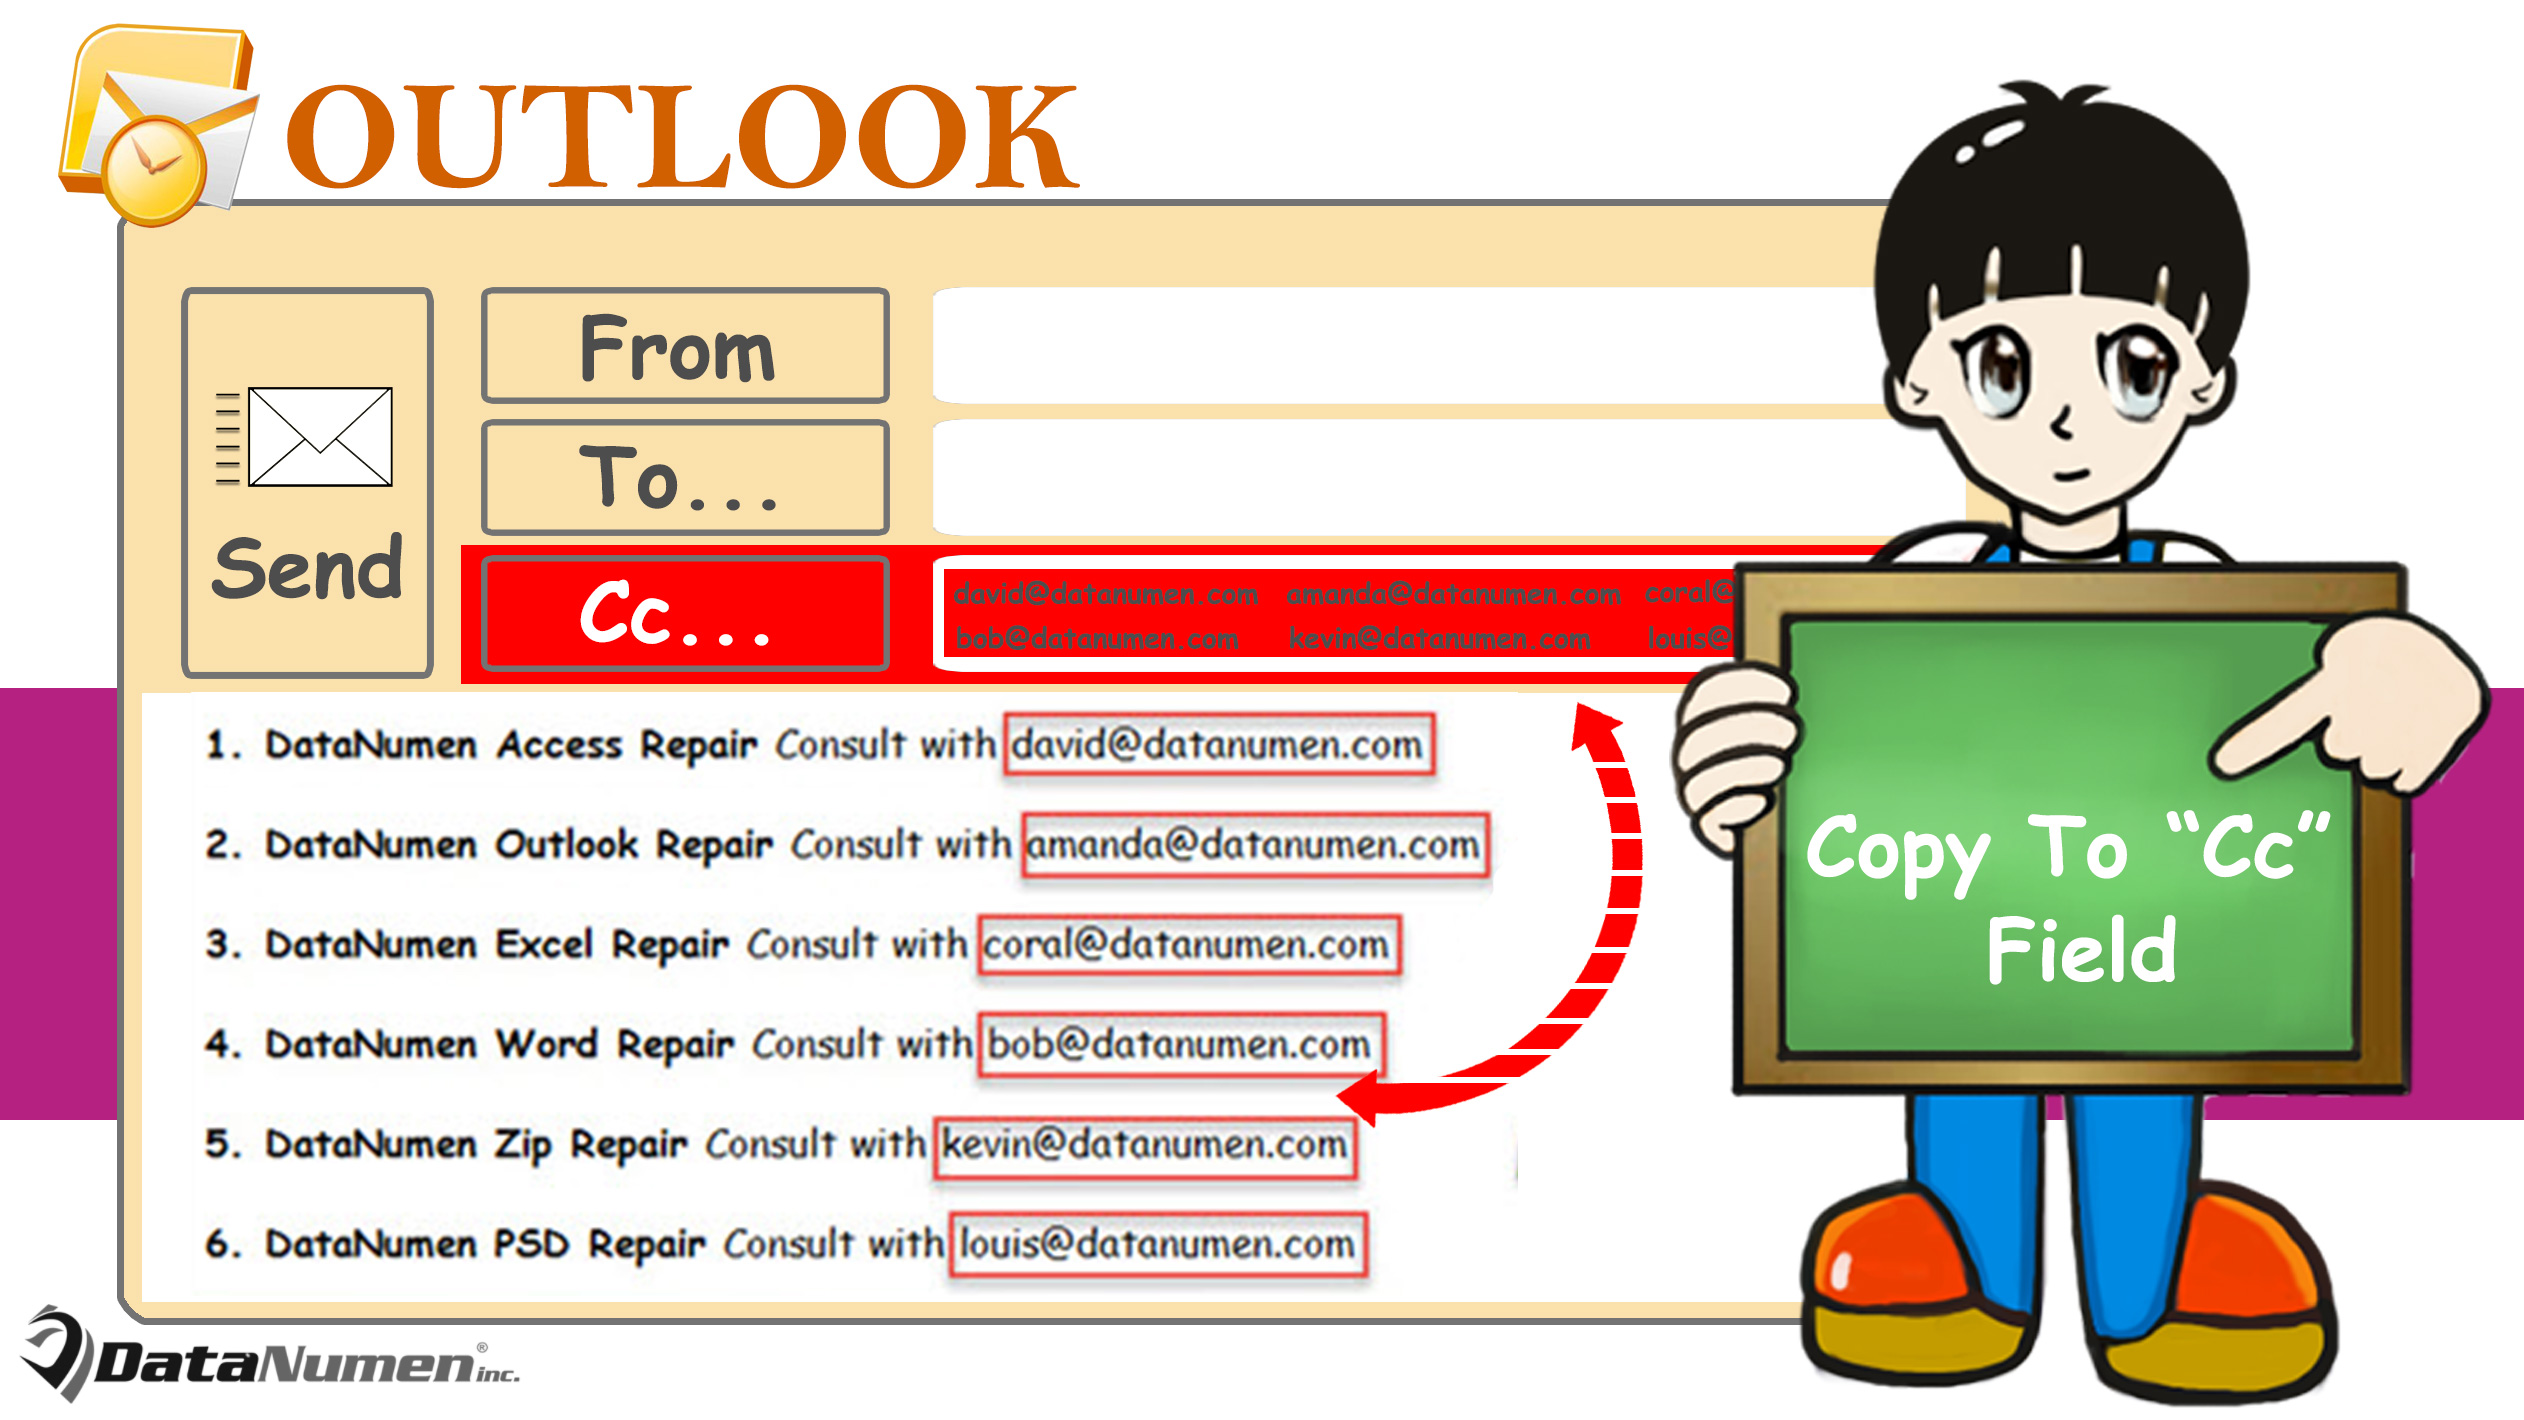 Copy All Email Addresses Occurring in Body to "CC" Field When Composing an Outlook Email